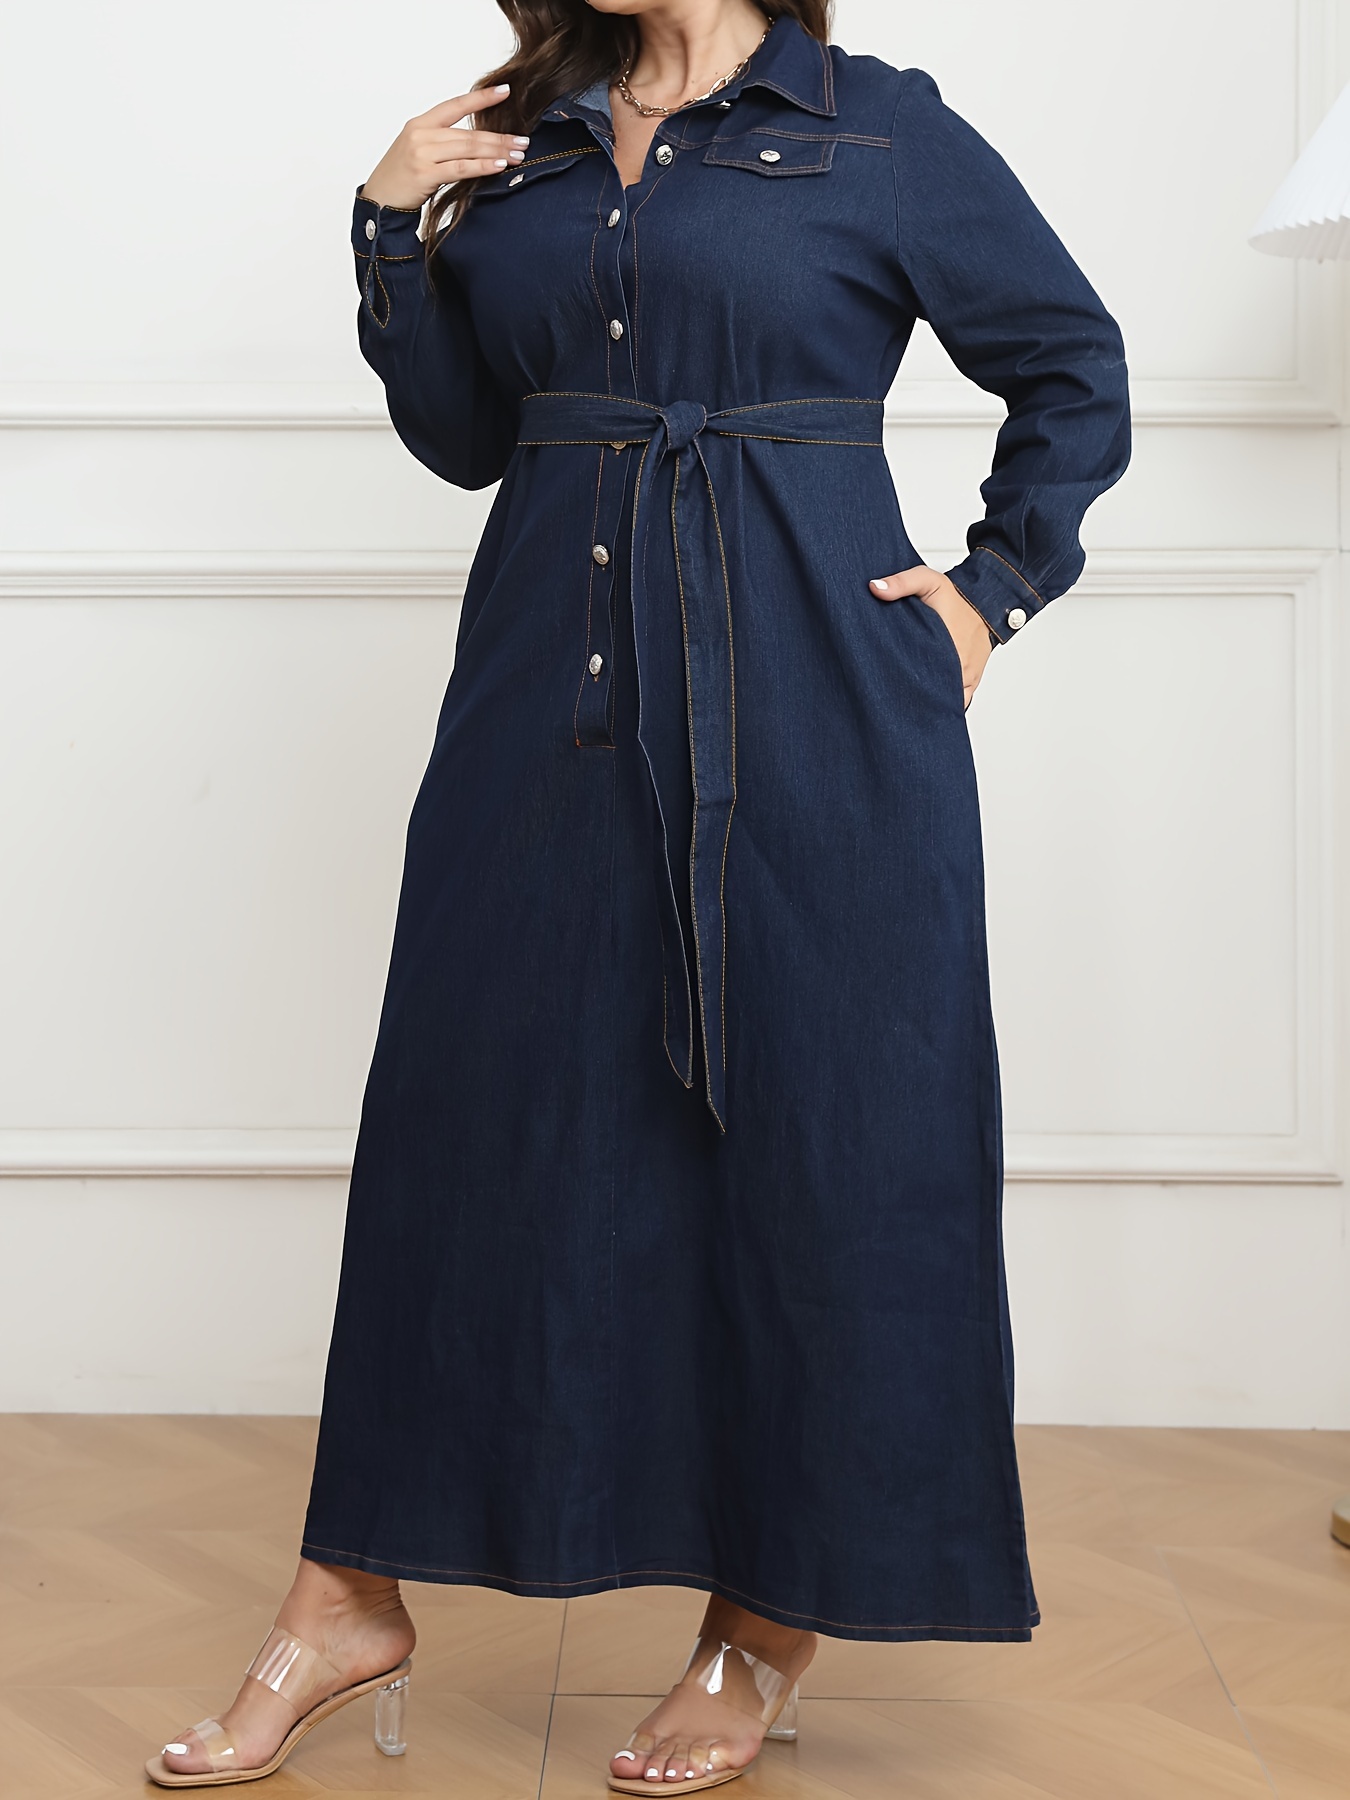 Plus Size Western Dresses Fall Clothes Maxi For Women Turn Down Collar  Casual Long Sleeve Dress Denim Wholesale DropPlus From Kuanlu, $36.37